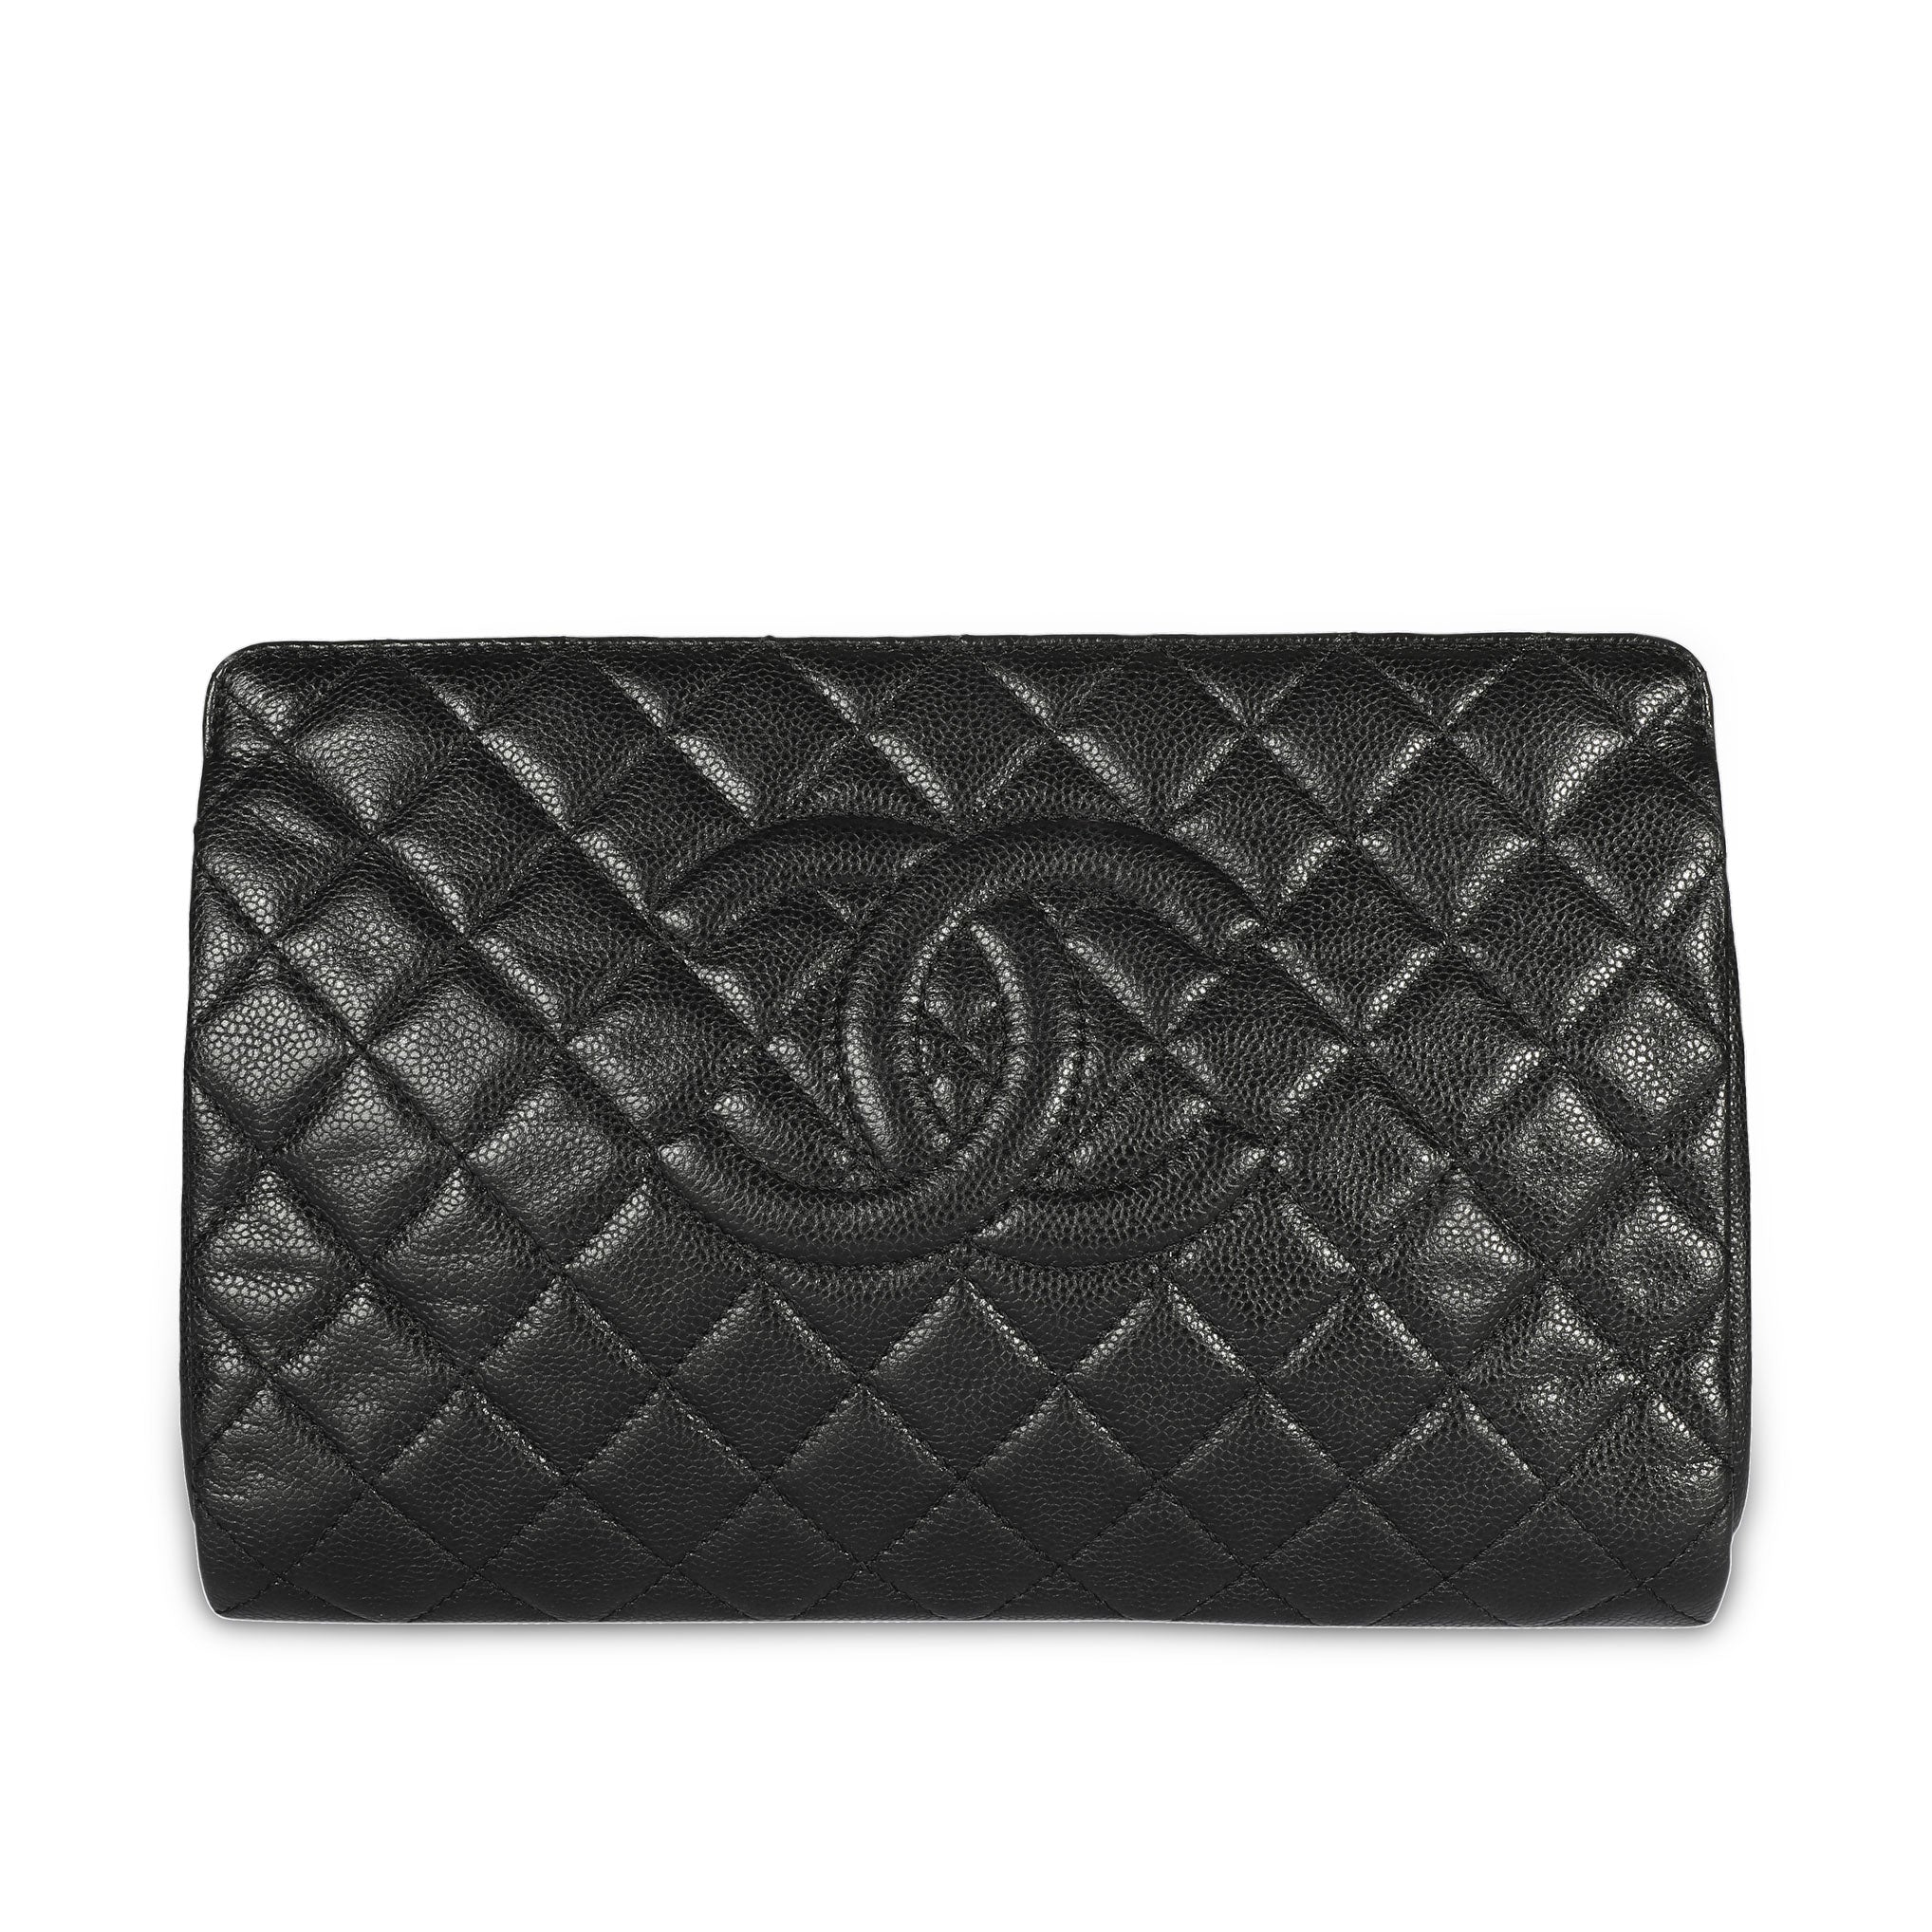 Black Caviar Quilted Timeless Frame Clutch by WP – myGemma| Item